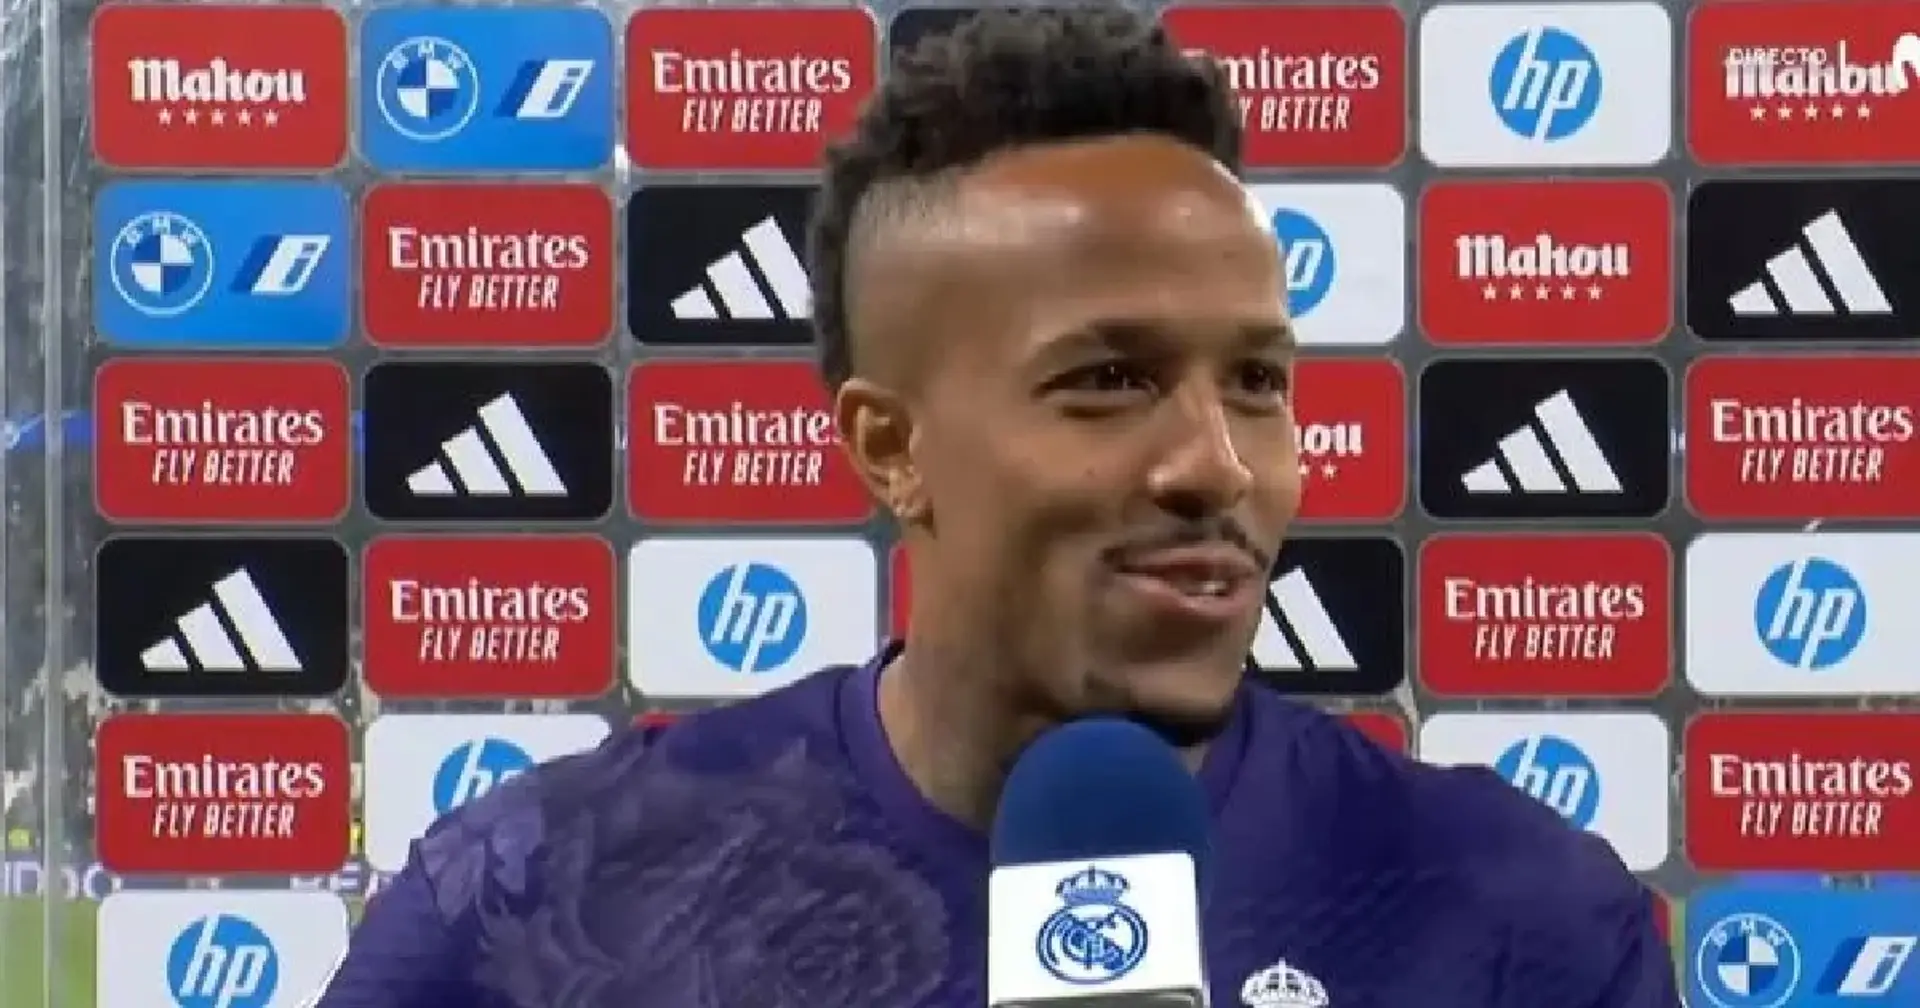 'Looking at them made me smile': Militao recalls persons who helped him through recovery 